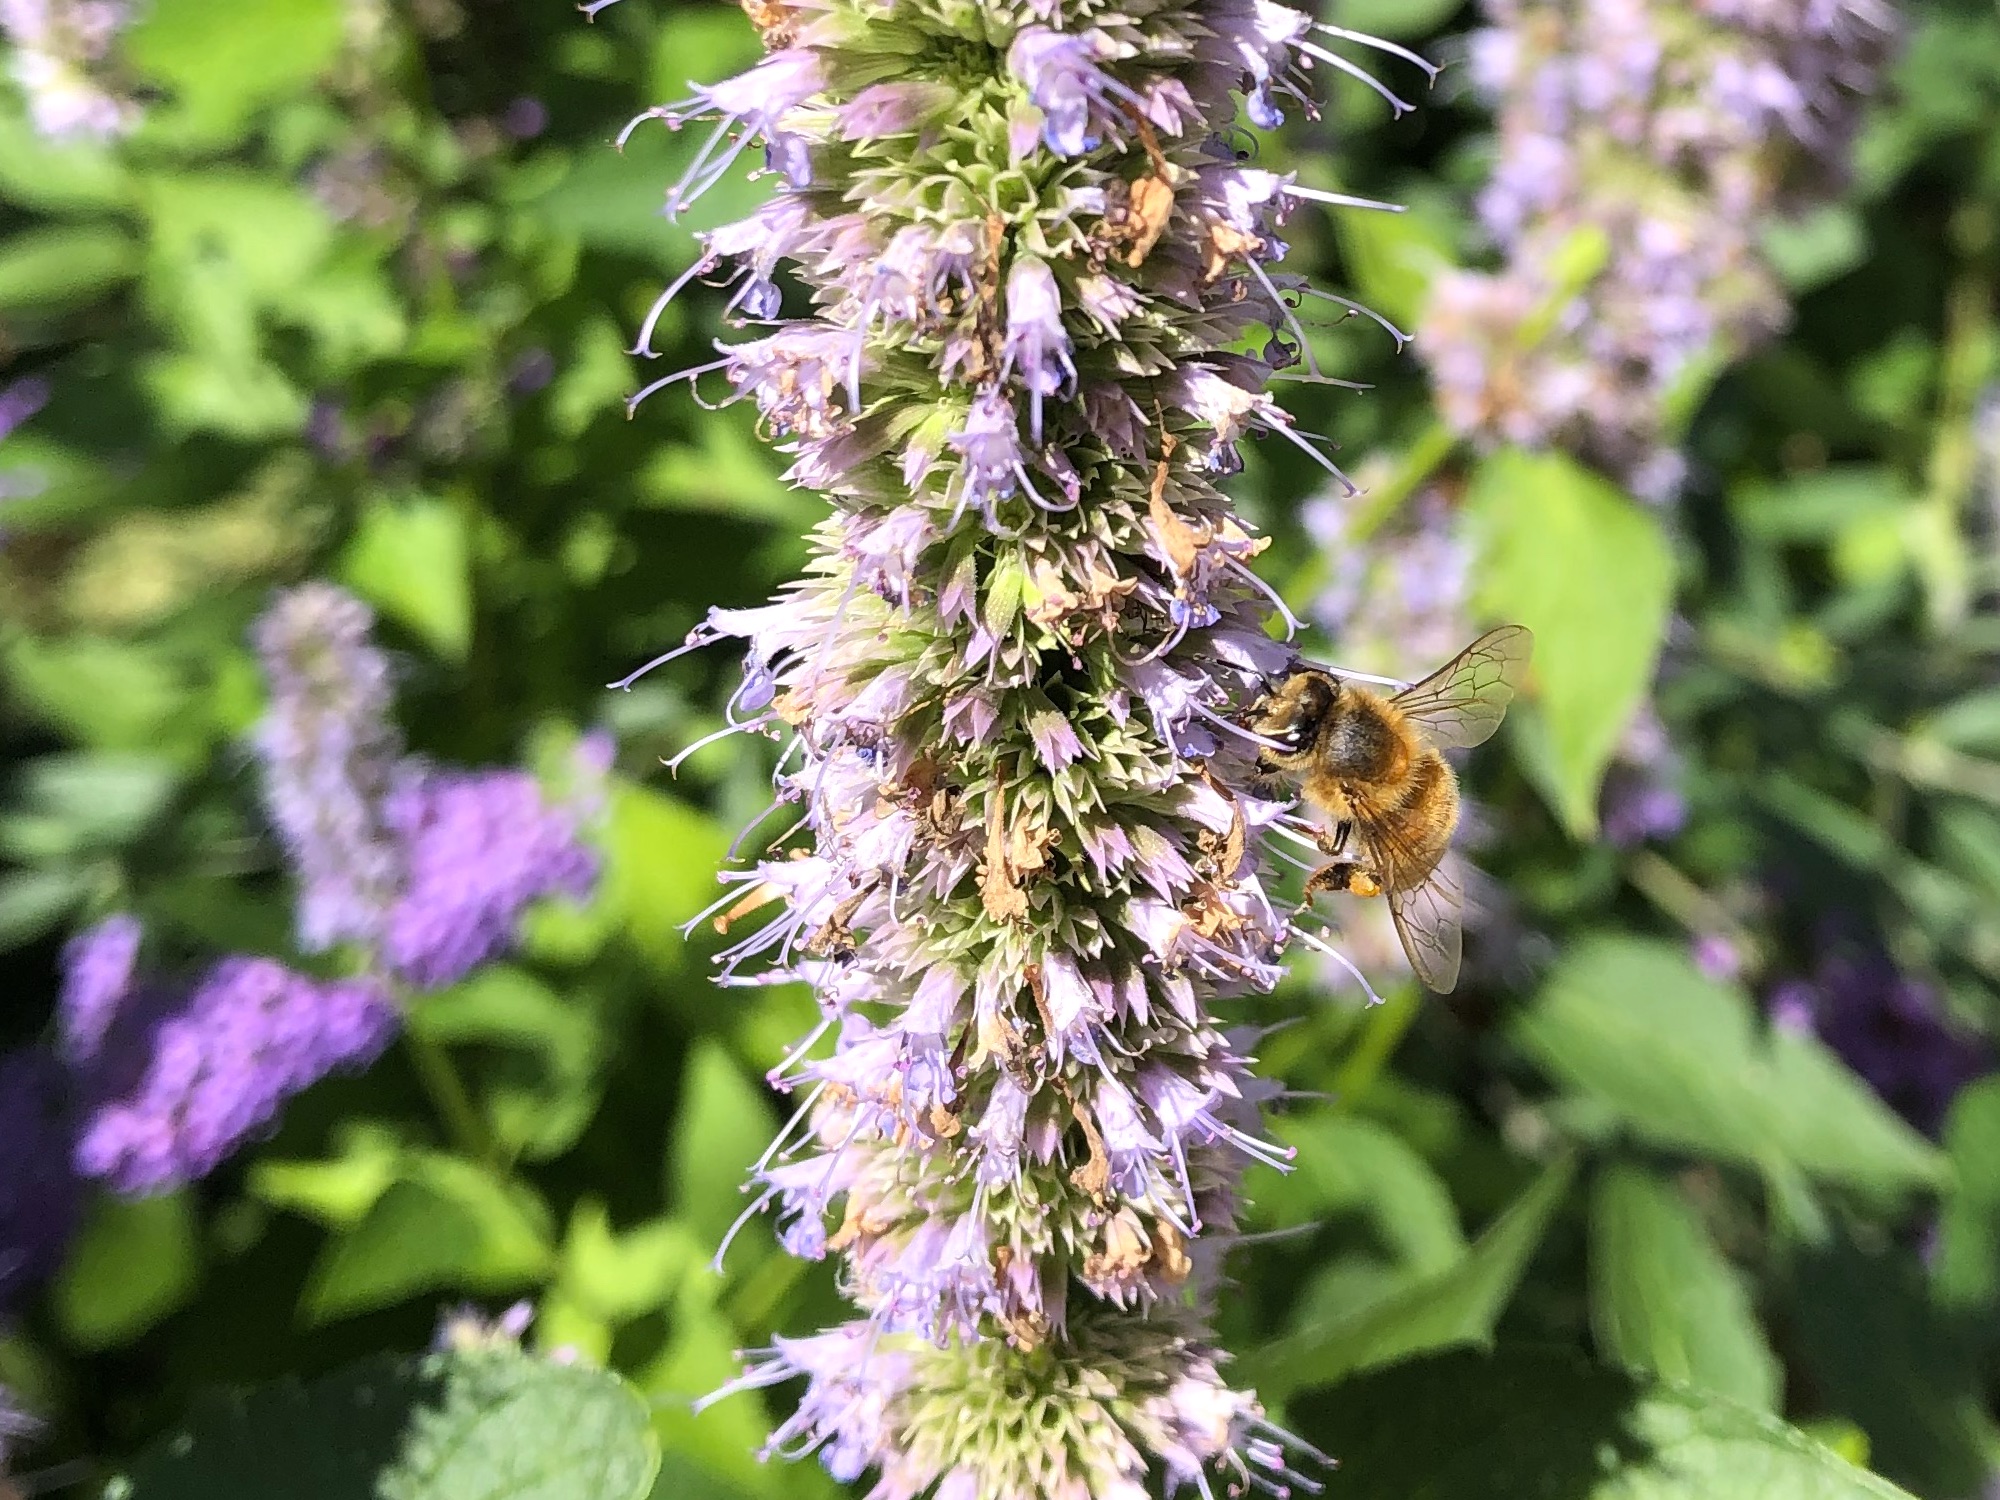 Hyssop near Agawa Path in Nakoma in Madison, Wisconsin on August 18, 2020.